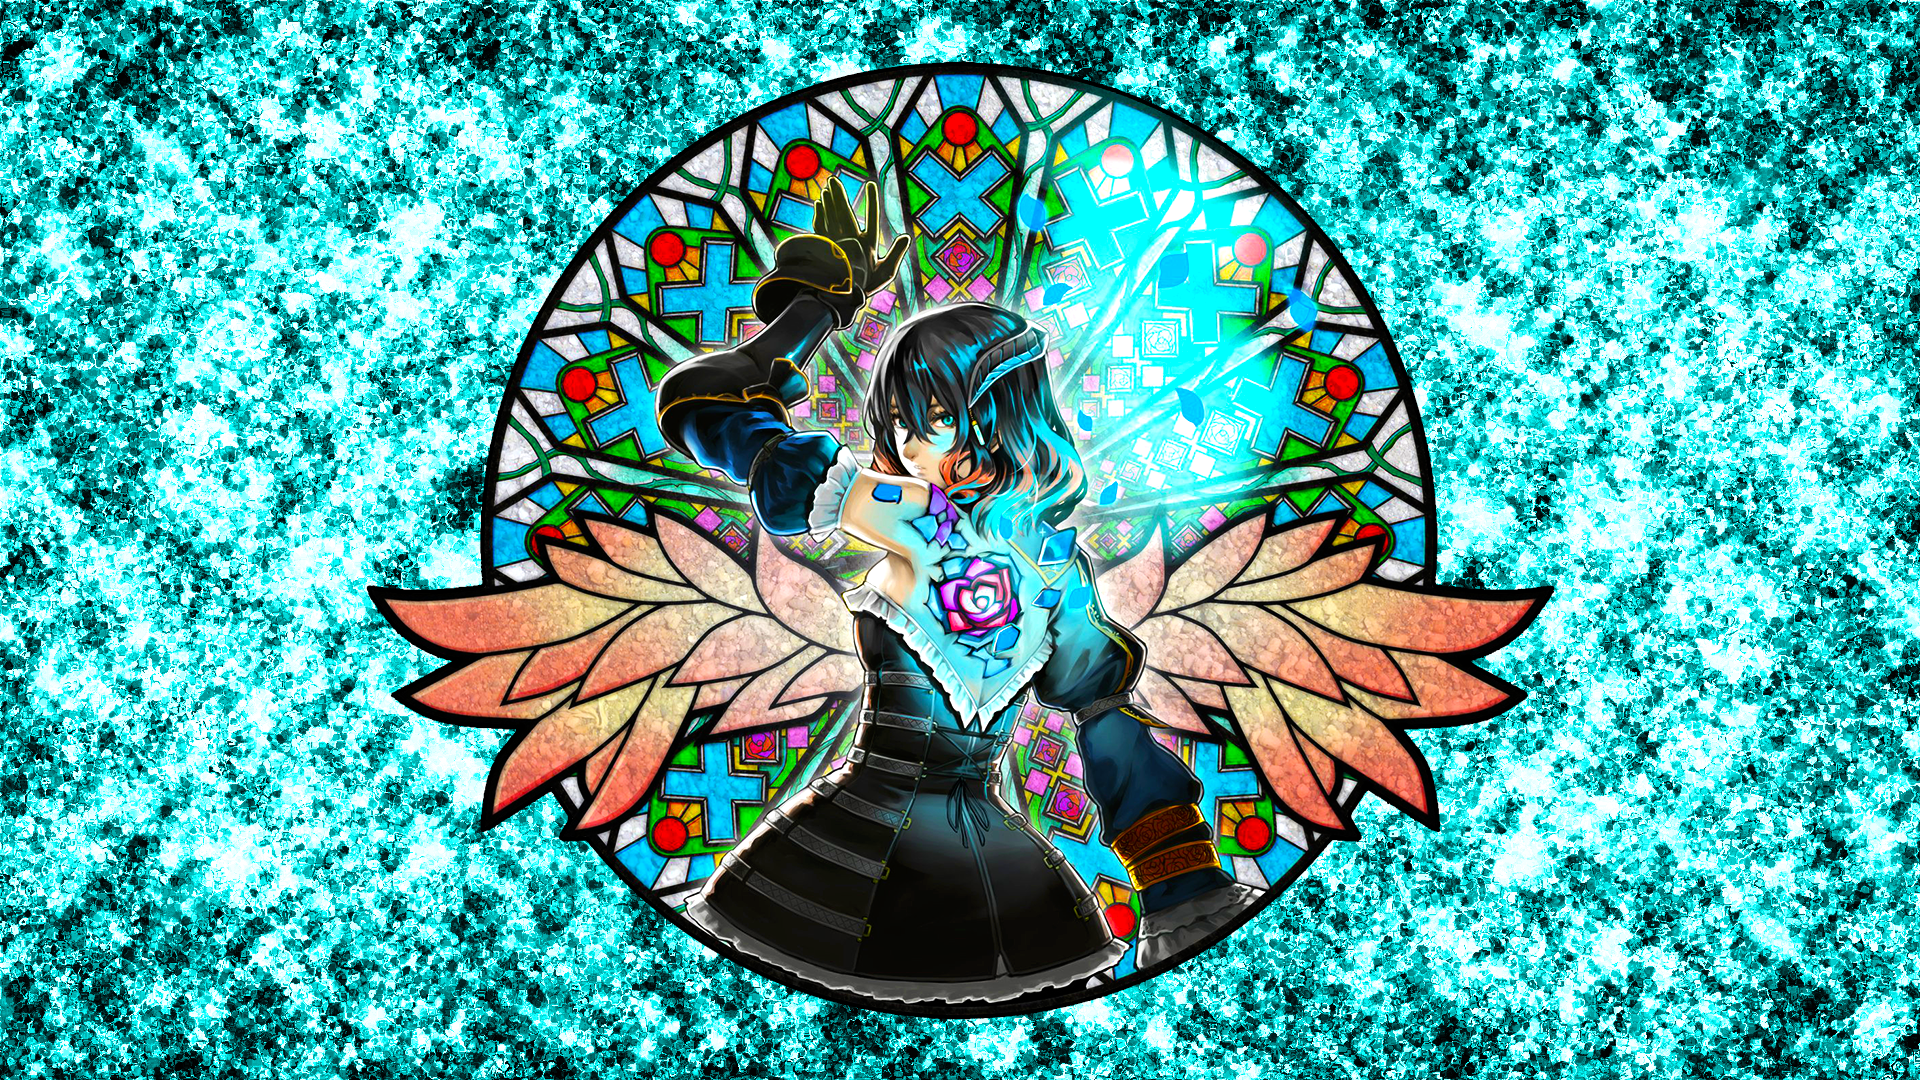 General 1920x1080 Bloodstained: Ritual of the Night Miriam (Bloodstained) video games video game girls stained glass cyan fantasy art fantasy girl